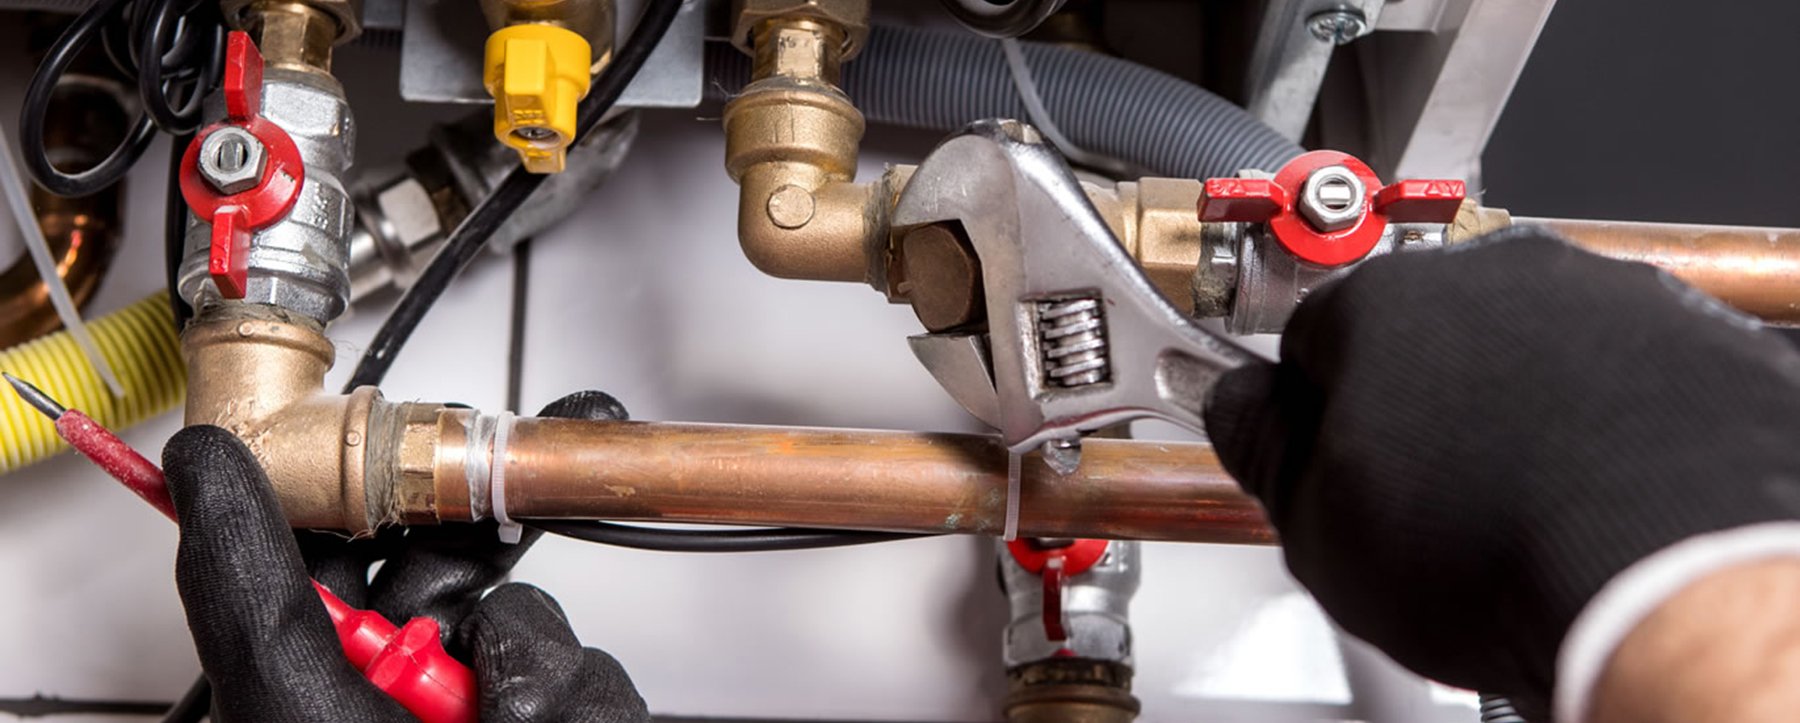 Repairing and servicing gas fires with certified gas fitters